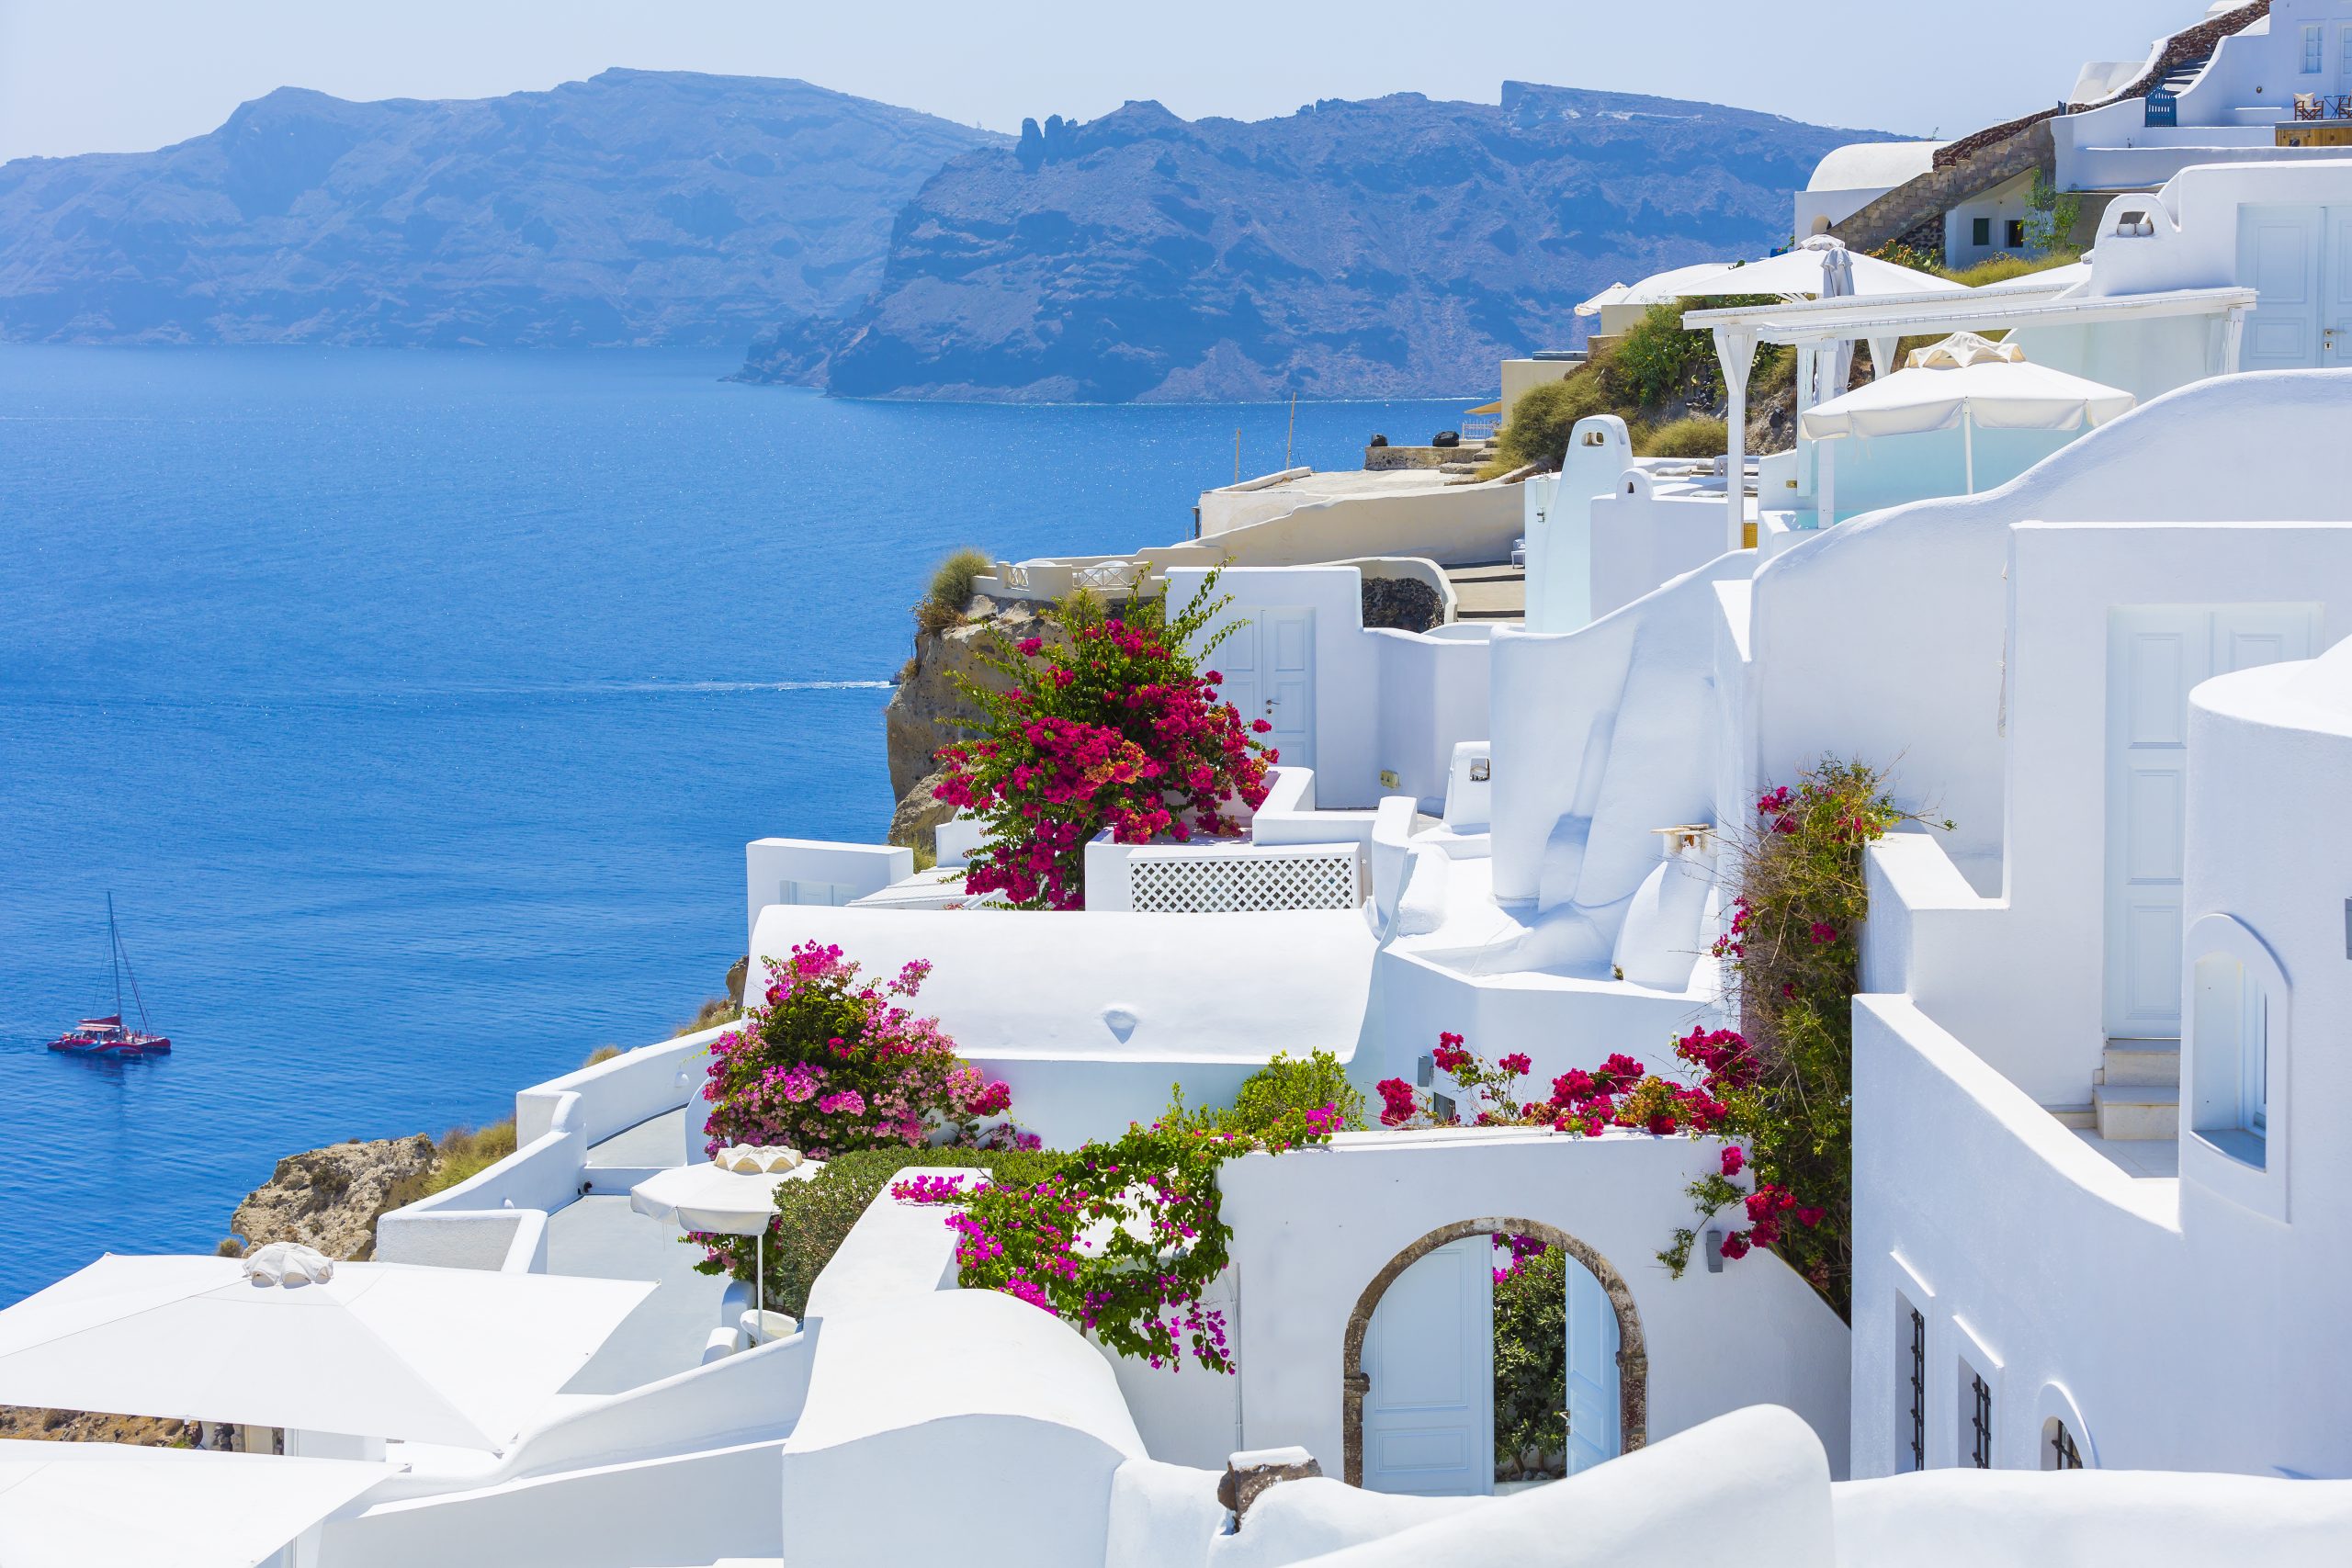 Soak in the Beauty of the Cyclades